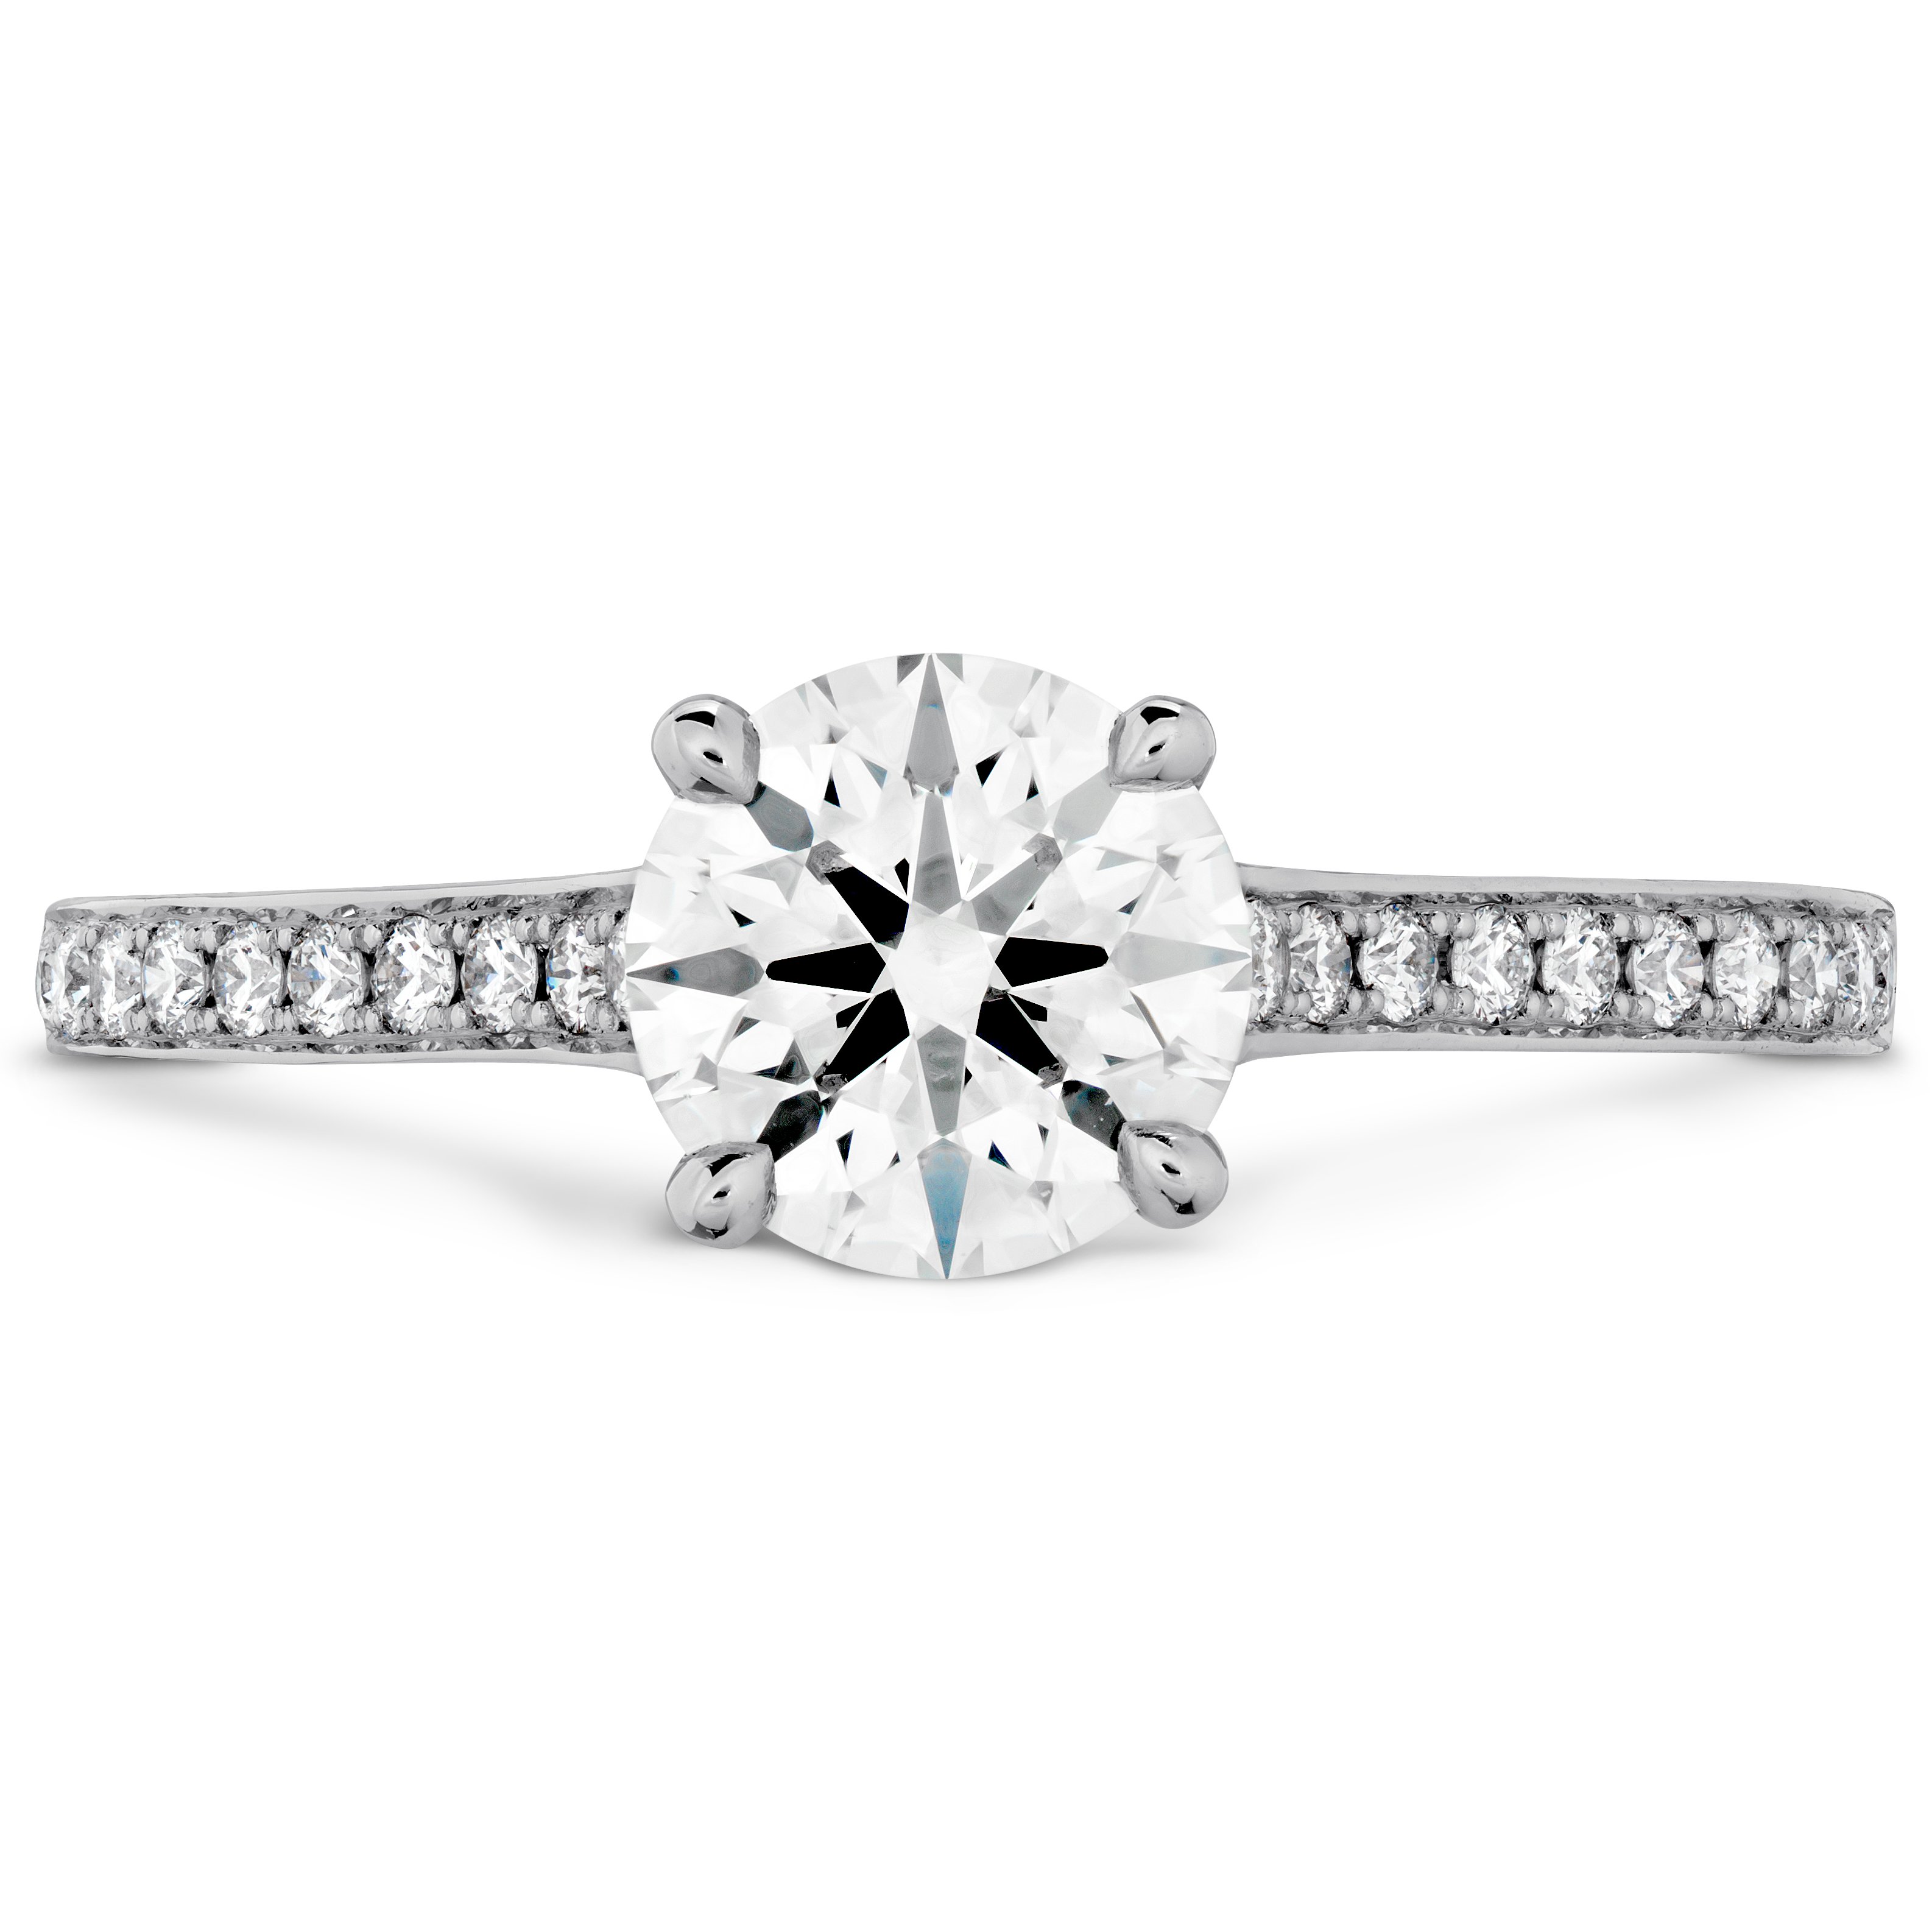 https://www.arthursjewelers.com/content/images/thumbs/Original/Illustrious Ring with Intensive Band-173929520.jpg